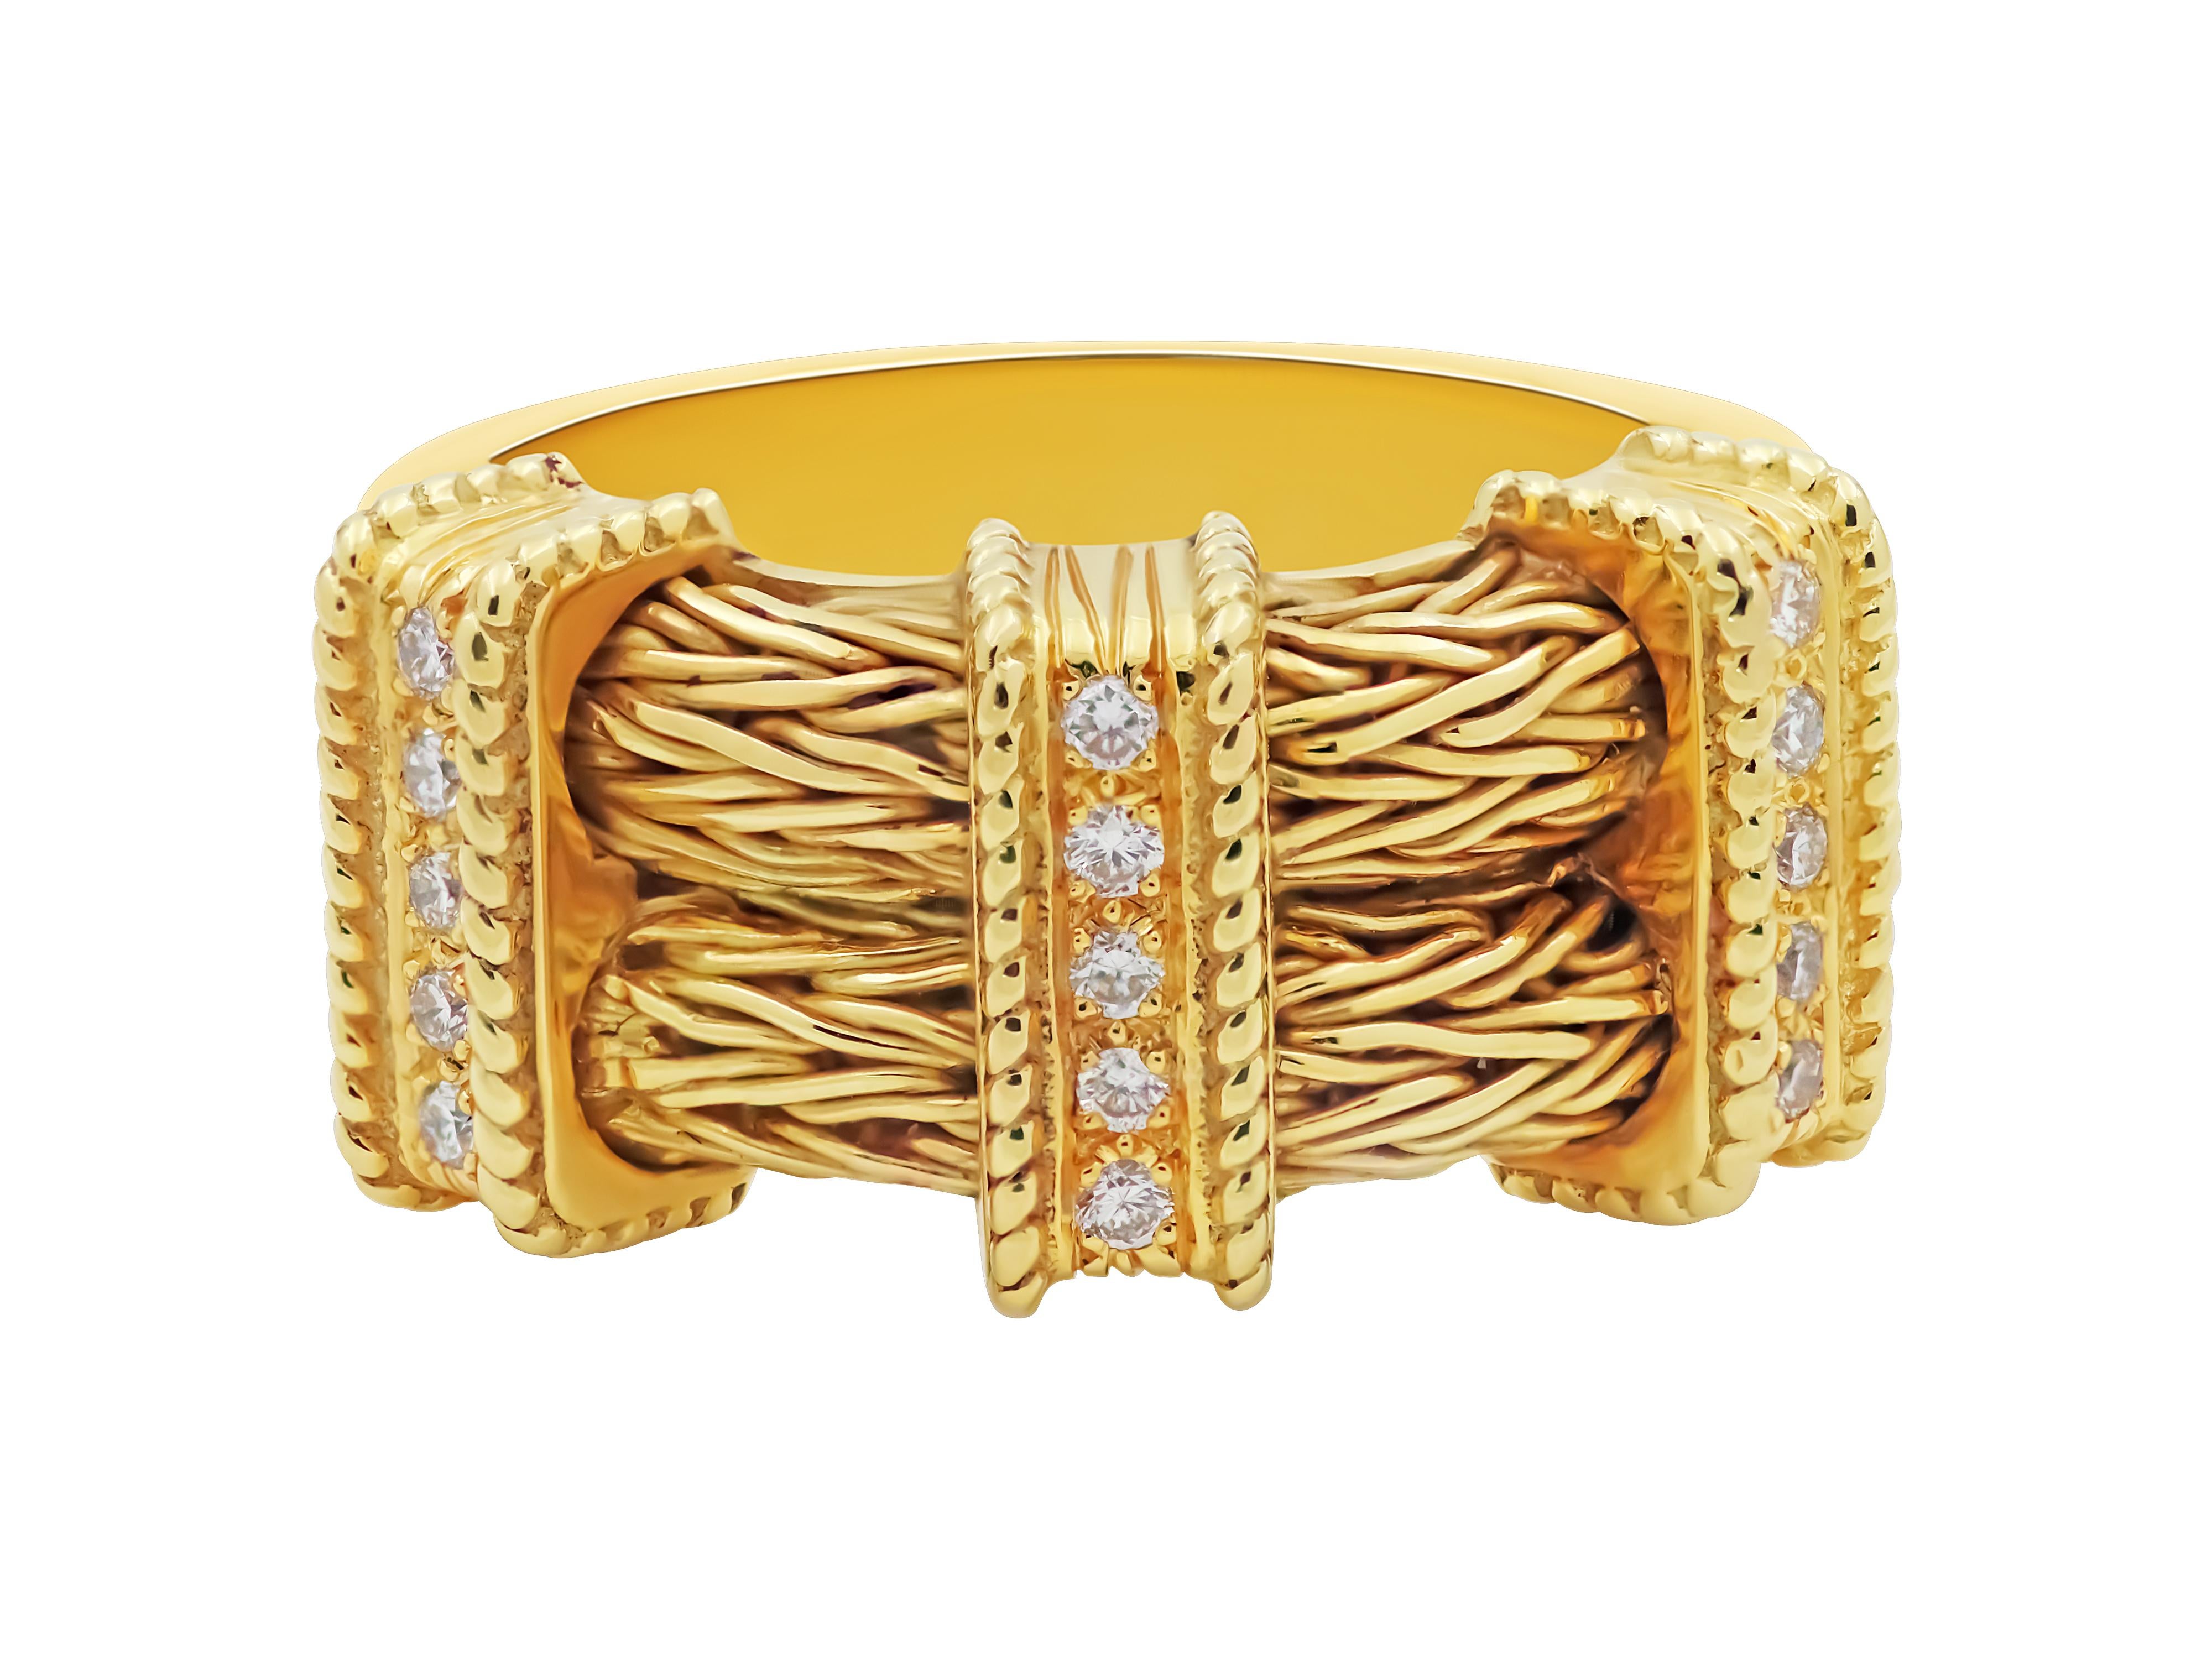 From Dimos Neoclassic collection this ring in 18 karat yellow gold with a beautiful knitted double rope work and the diamond bars that complete the set and the distinct look of our ring. 

Dimensions
Top width: 0.3937